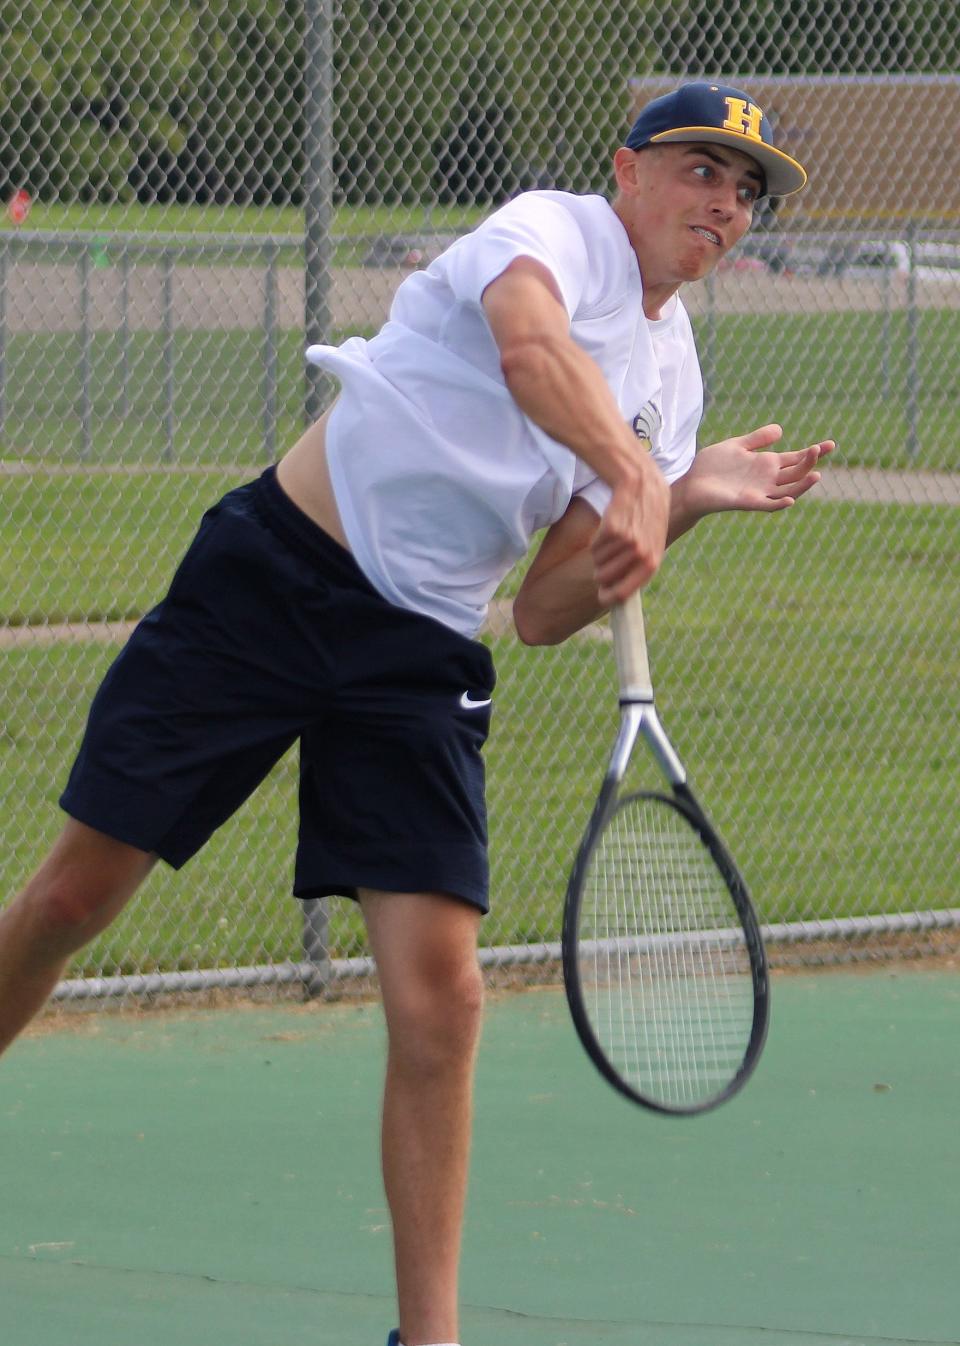 Hartland's Payton Bell was 2-1 at No. 1 singles in the season-opening Livingston County tennis quad on Monday, Aug. 15, 2022 at Fowlerville.